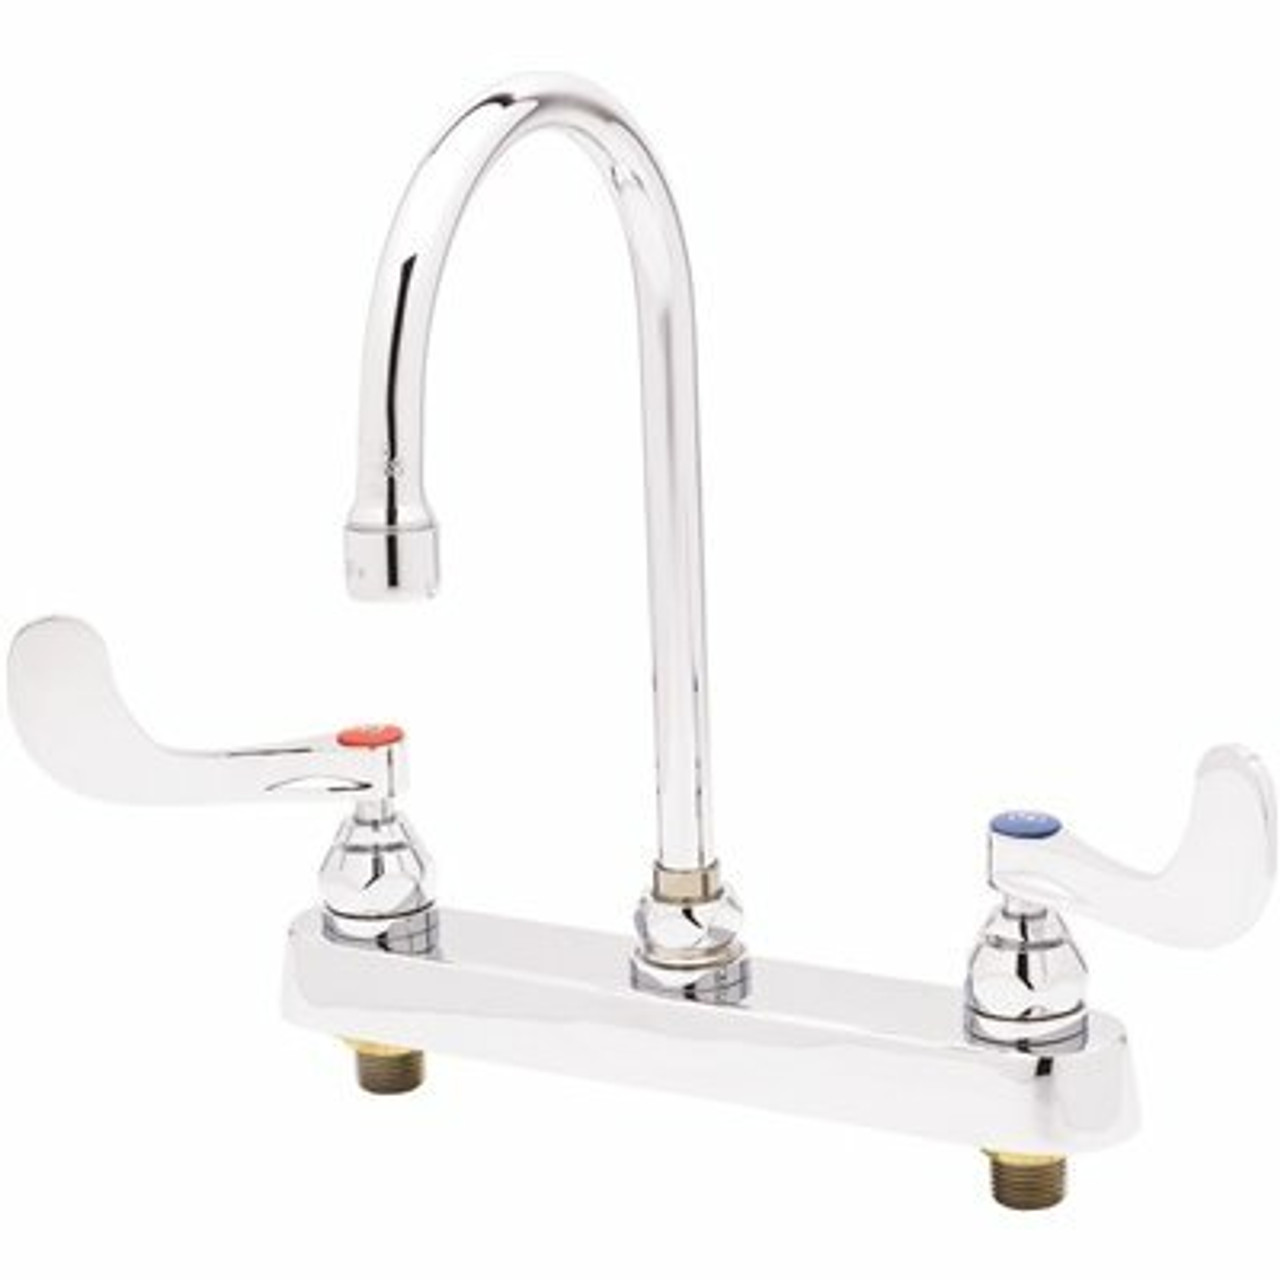 T&S 2-Handle Bar Faucet With Swivel Gooseneck In Chrome